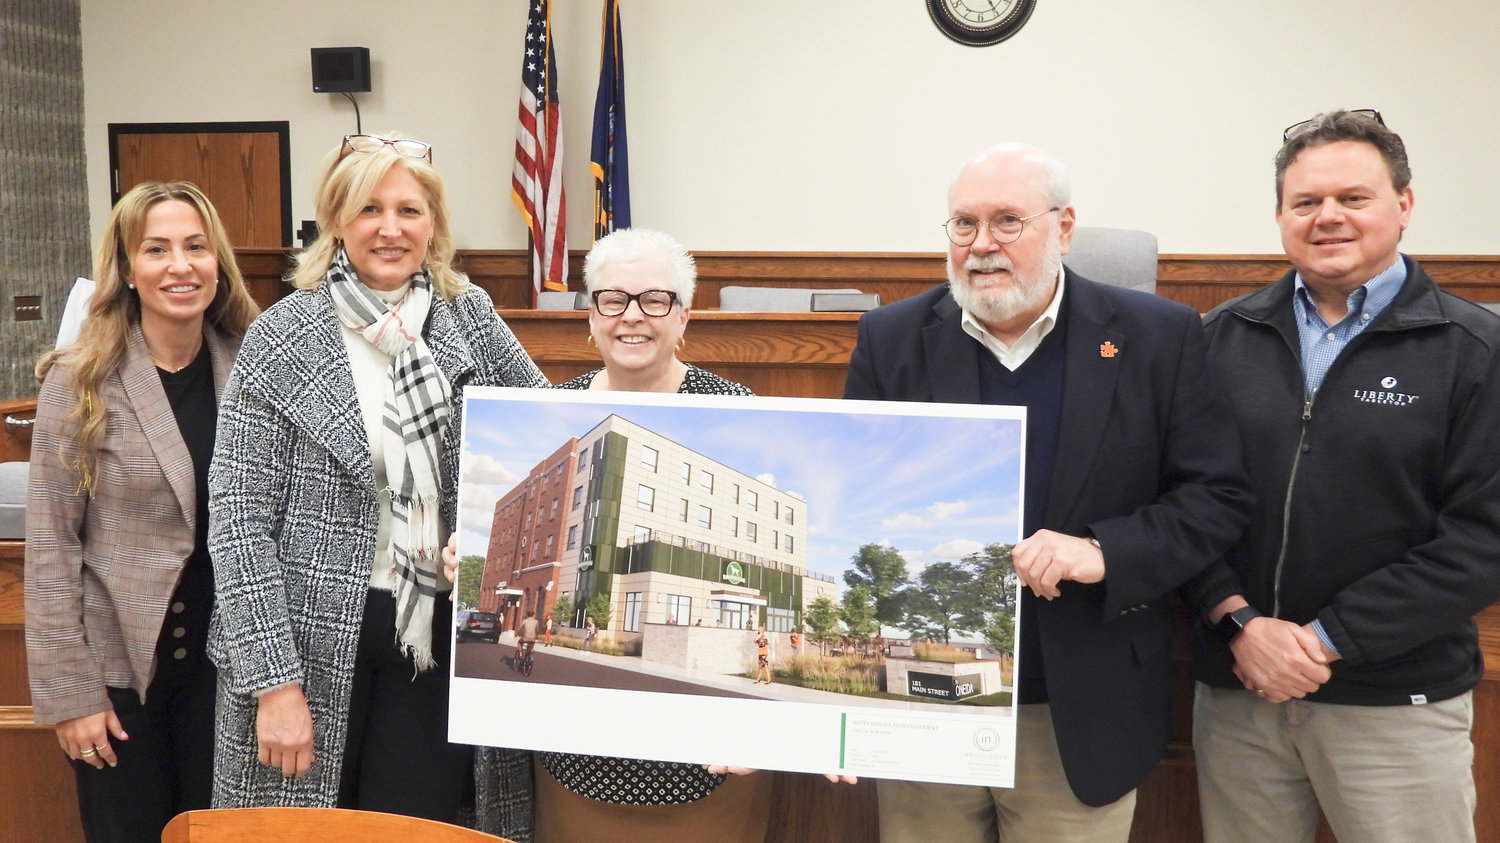 Members of Oneida city government and a member of the development team pose with a rendering showing what The Oneida will look like in 2024. From left: Supervisor Brandee DuBois;  Mary Cavangh; Mayor Helen Acker; Managing Member Edward Riley; and Supervisor Matthew Roberts.